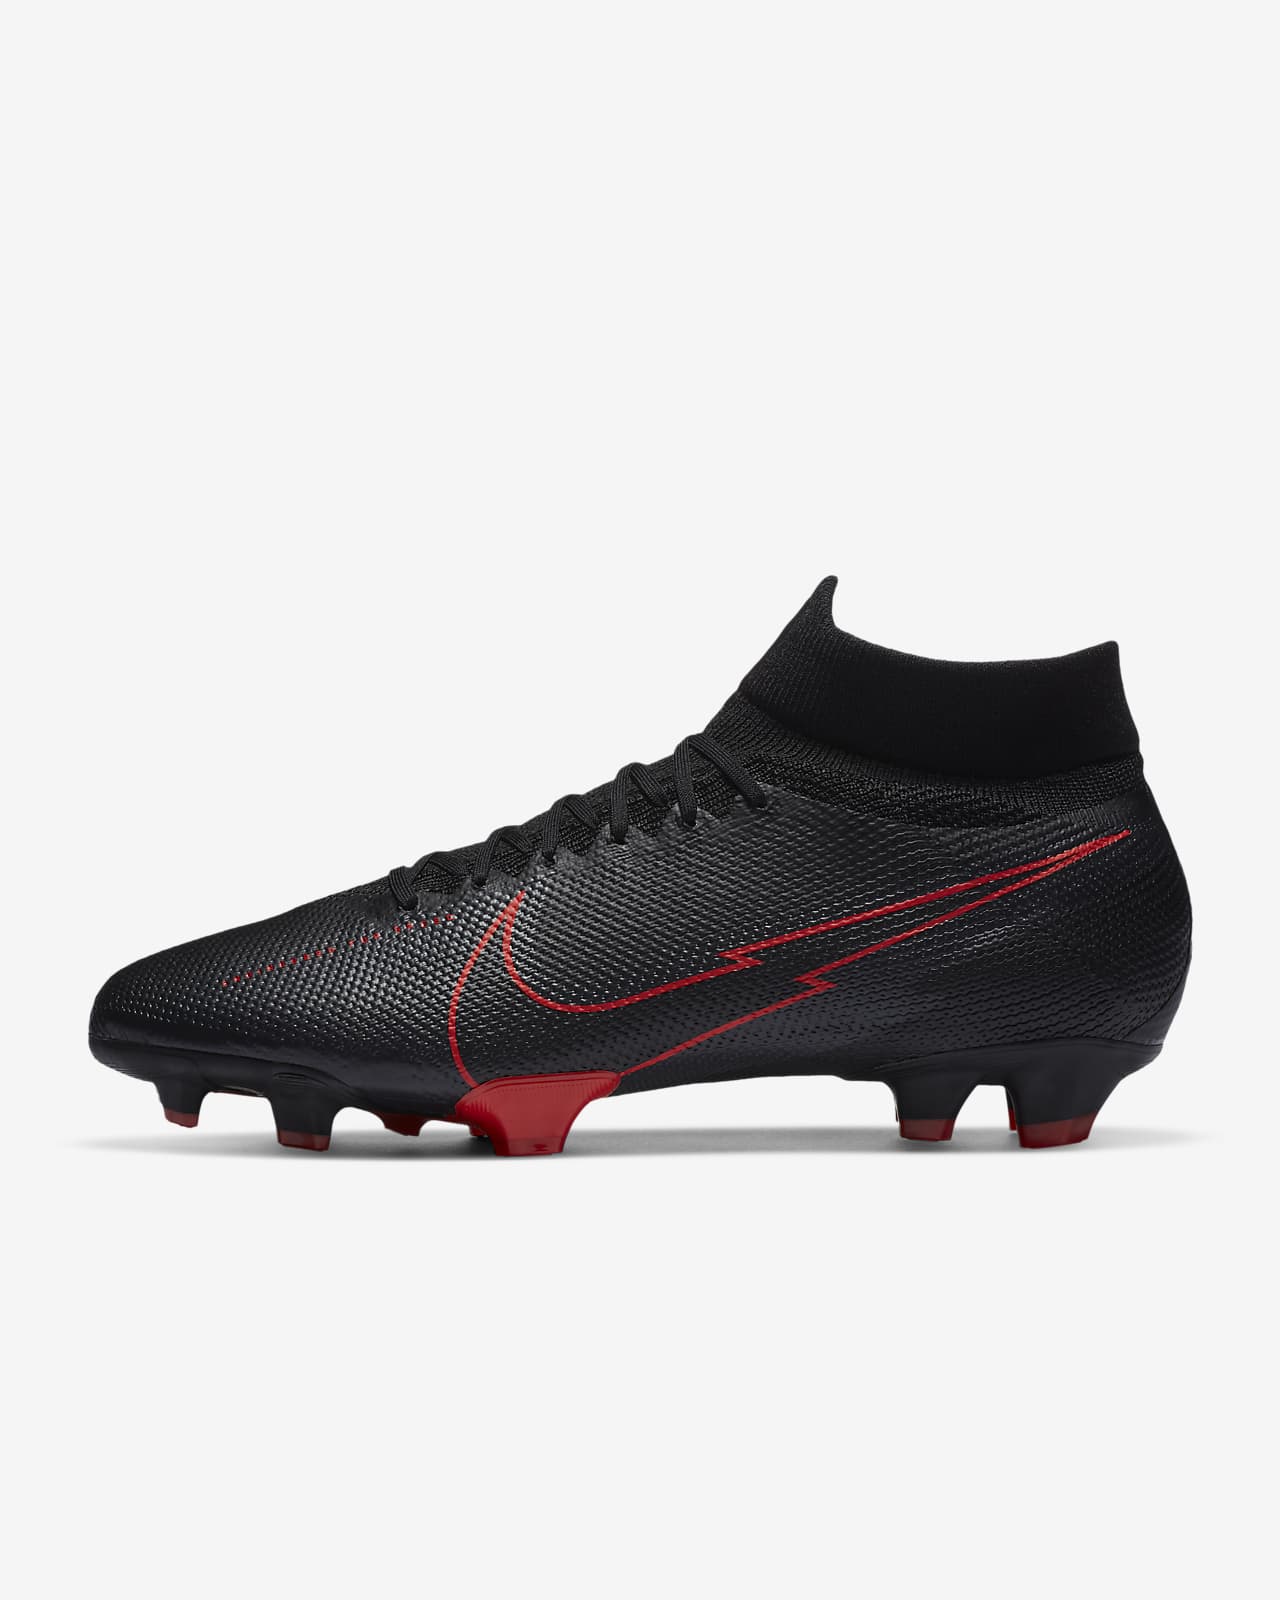 Nike Mercurial Superfly 7 Pro FG Firm-Ground Football Boot. Nike IL